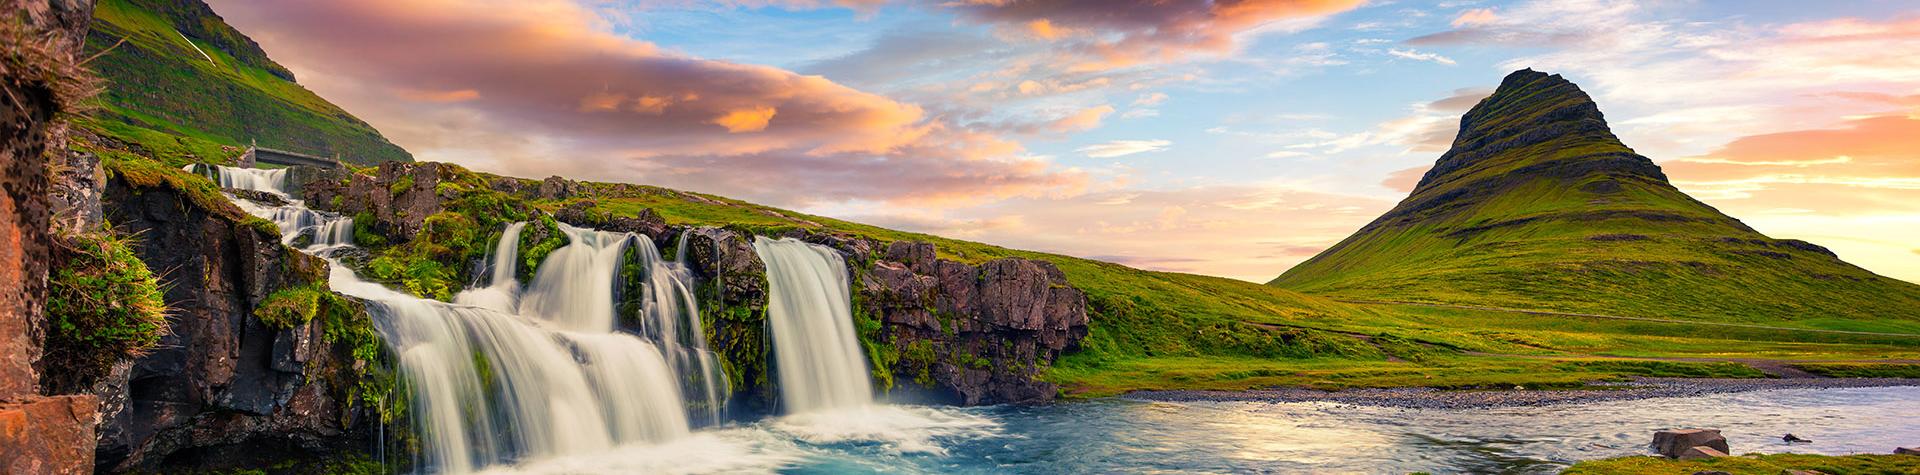 Tailor made holidays to Iceland